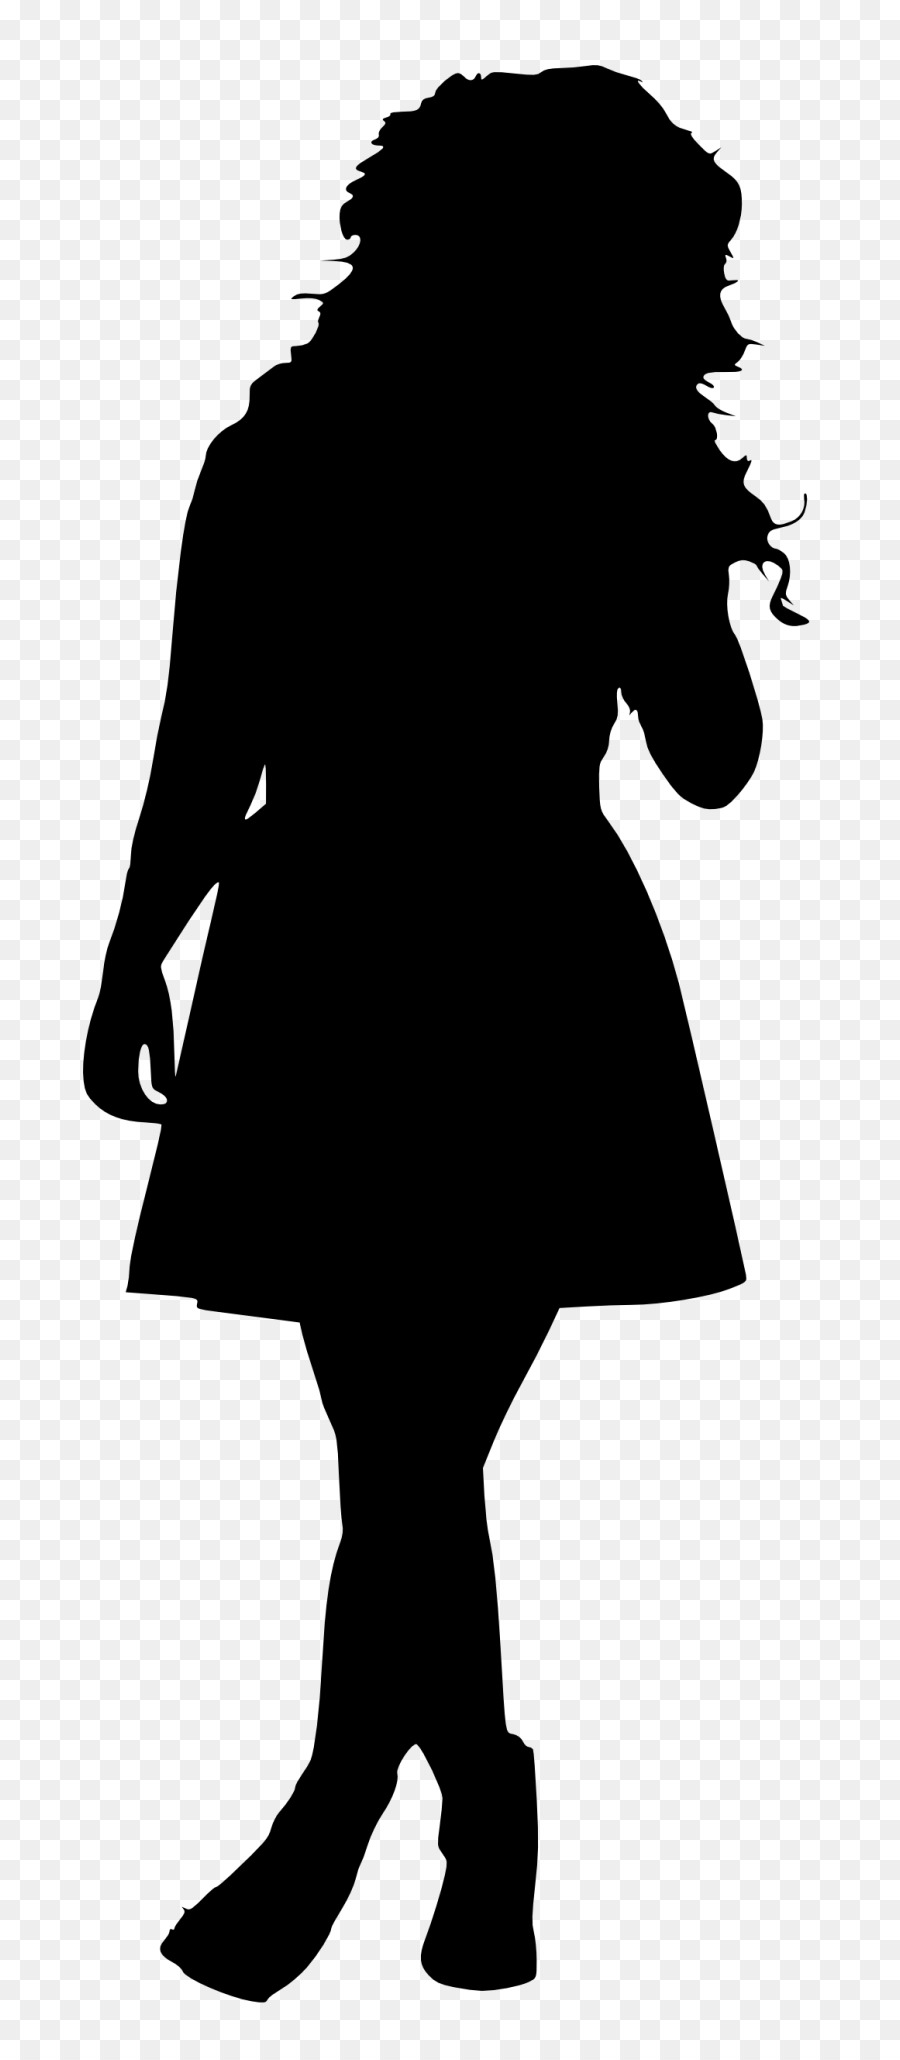 Silhouette Female - Silhouette png download - 768*2049 - Free Transparent Silhouette png Download.